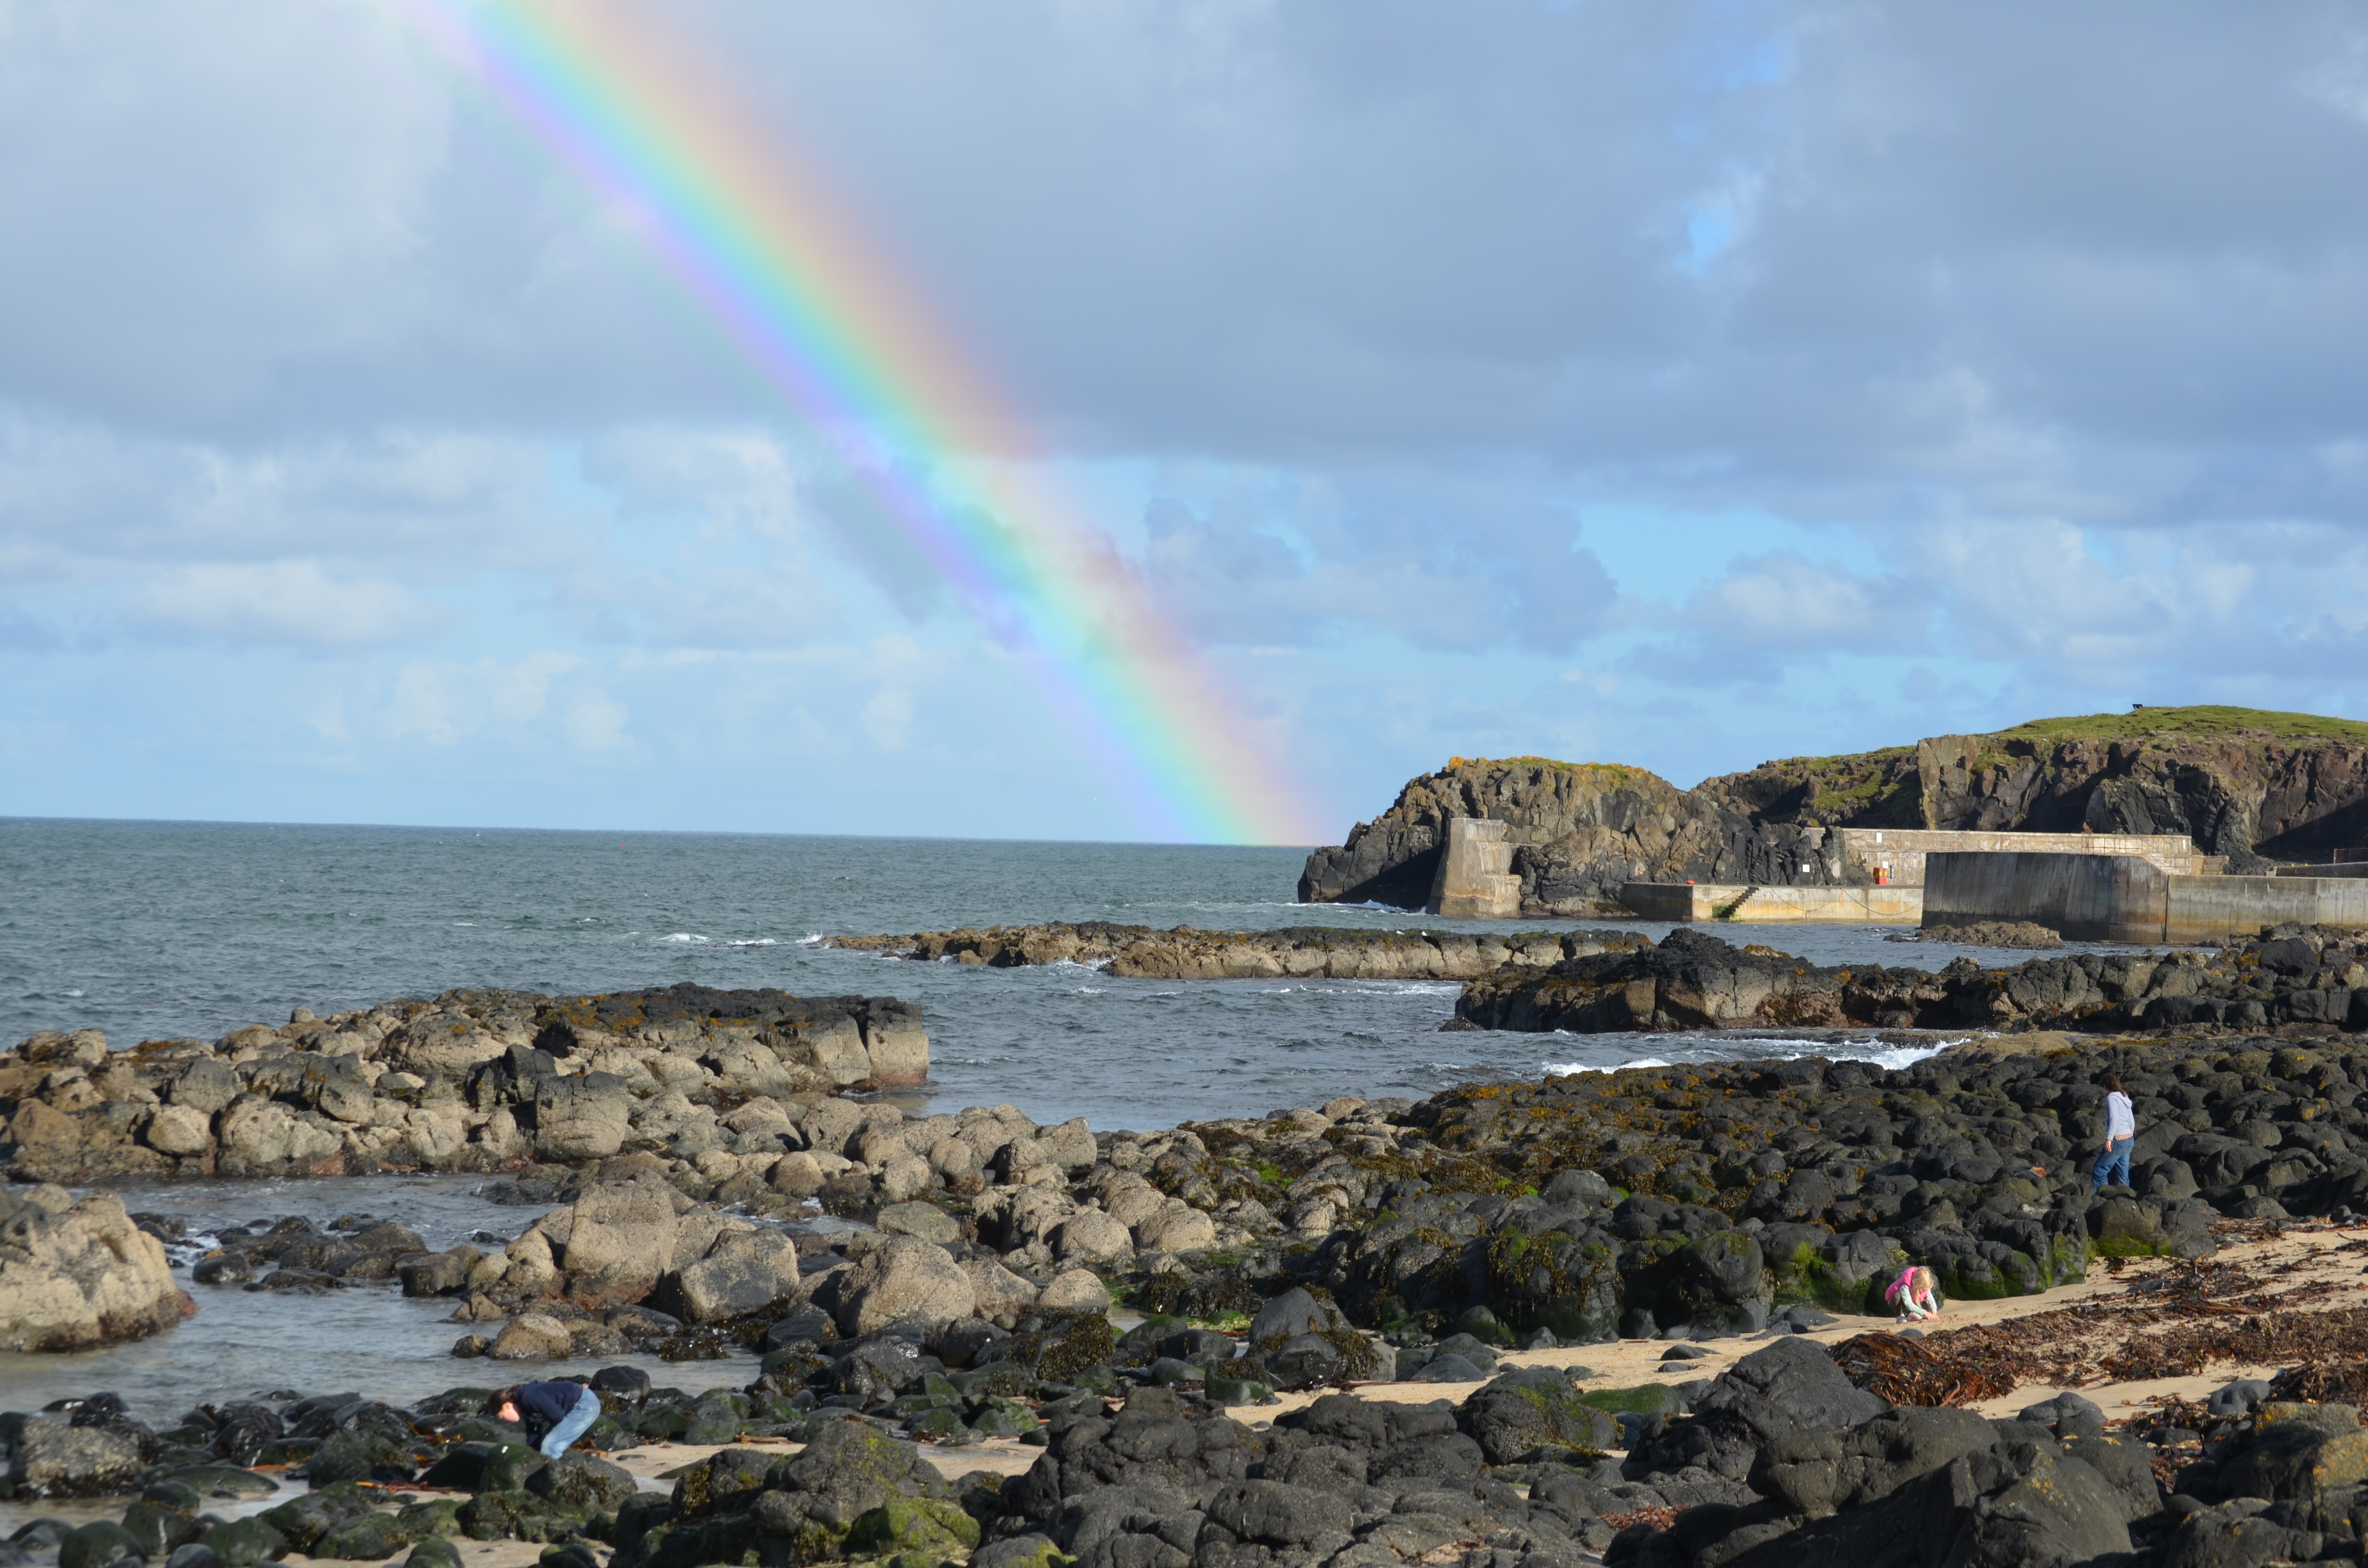 The treasure at the end of the rainbow?  Northern Ireland, of course!